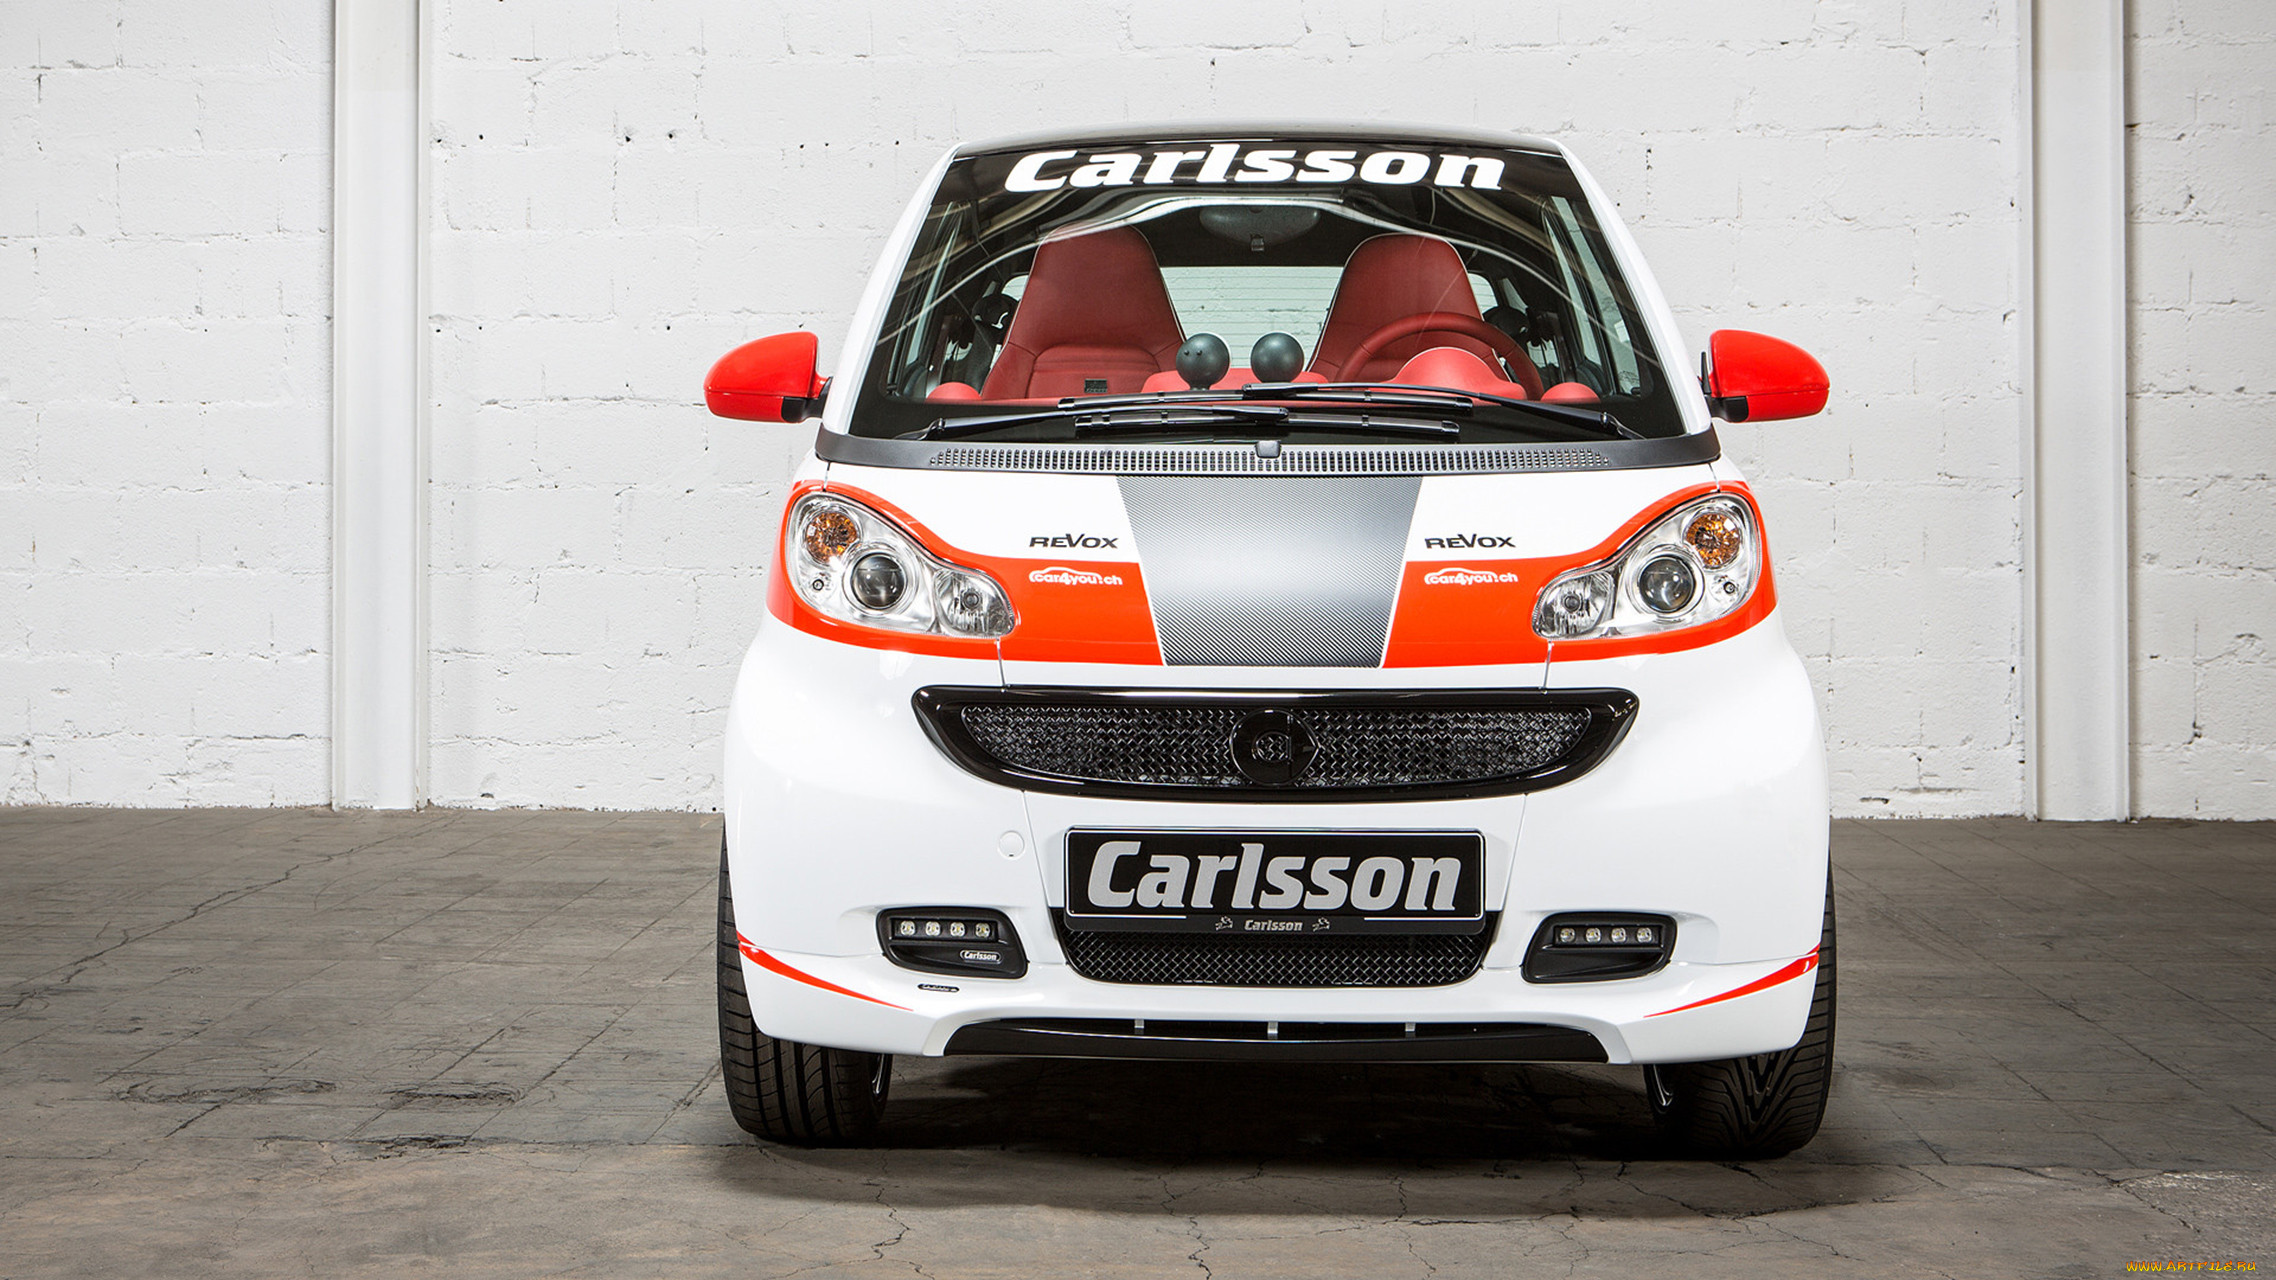 carlsson smart fortwo race edition 2013, , smart, race, 2013, fortwo, edition, carlsson